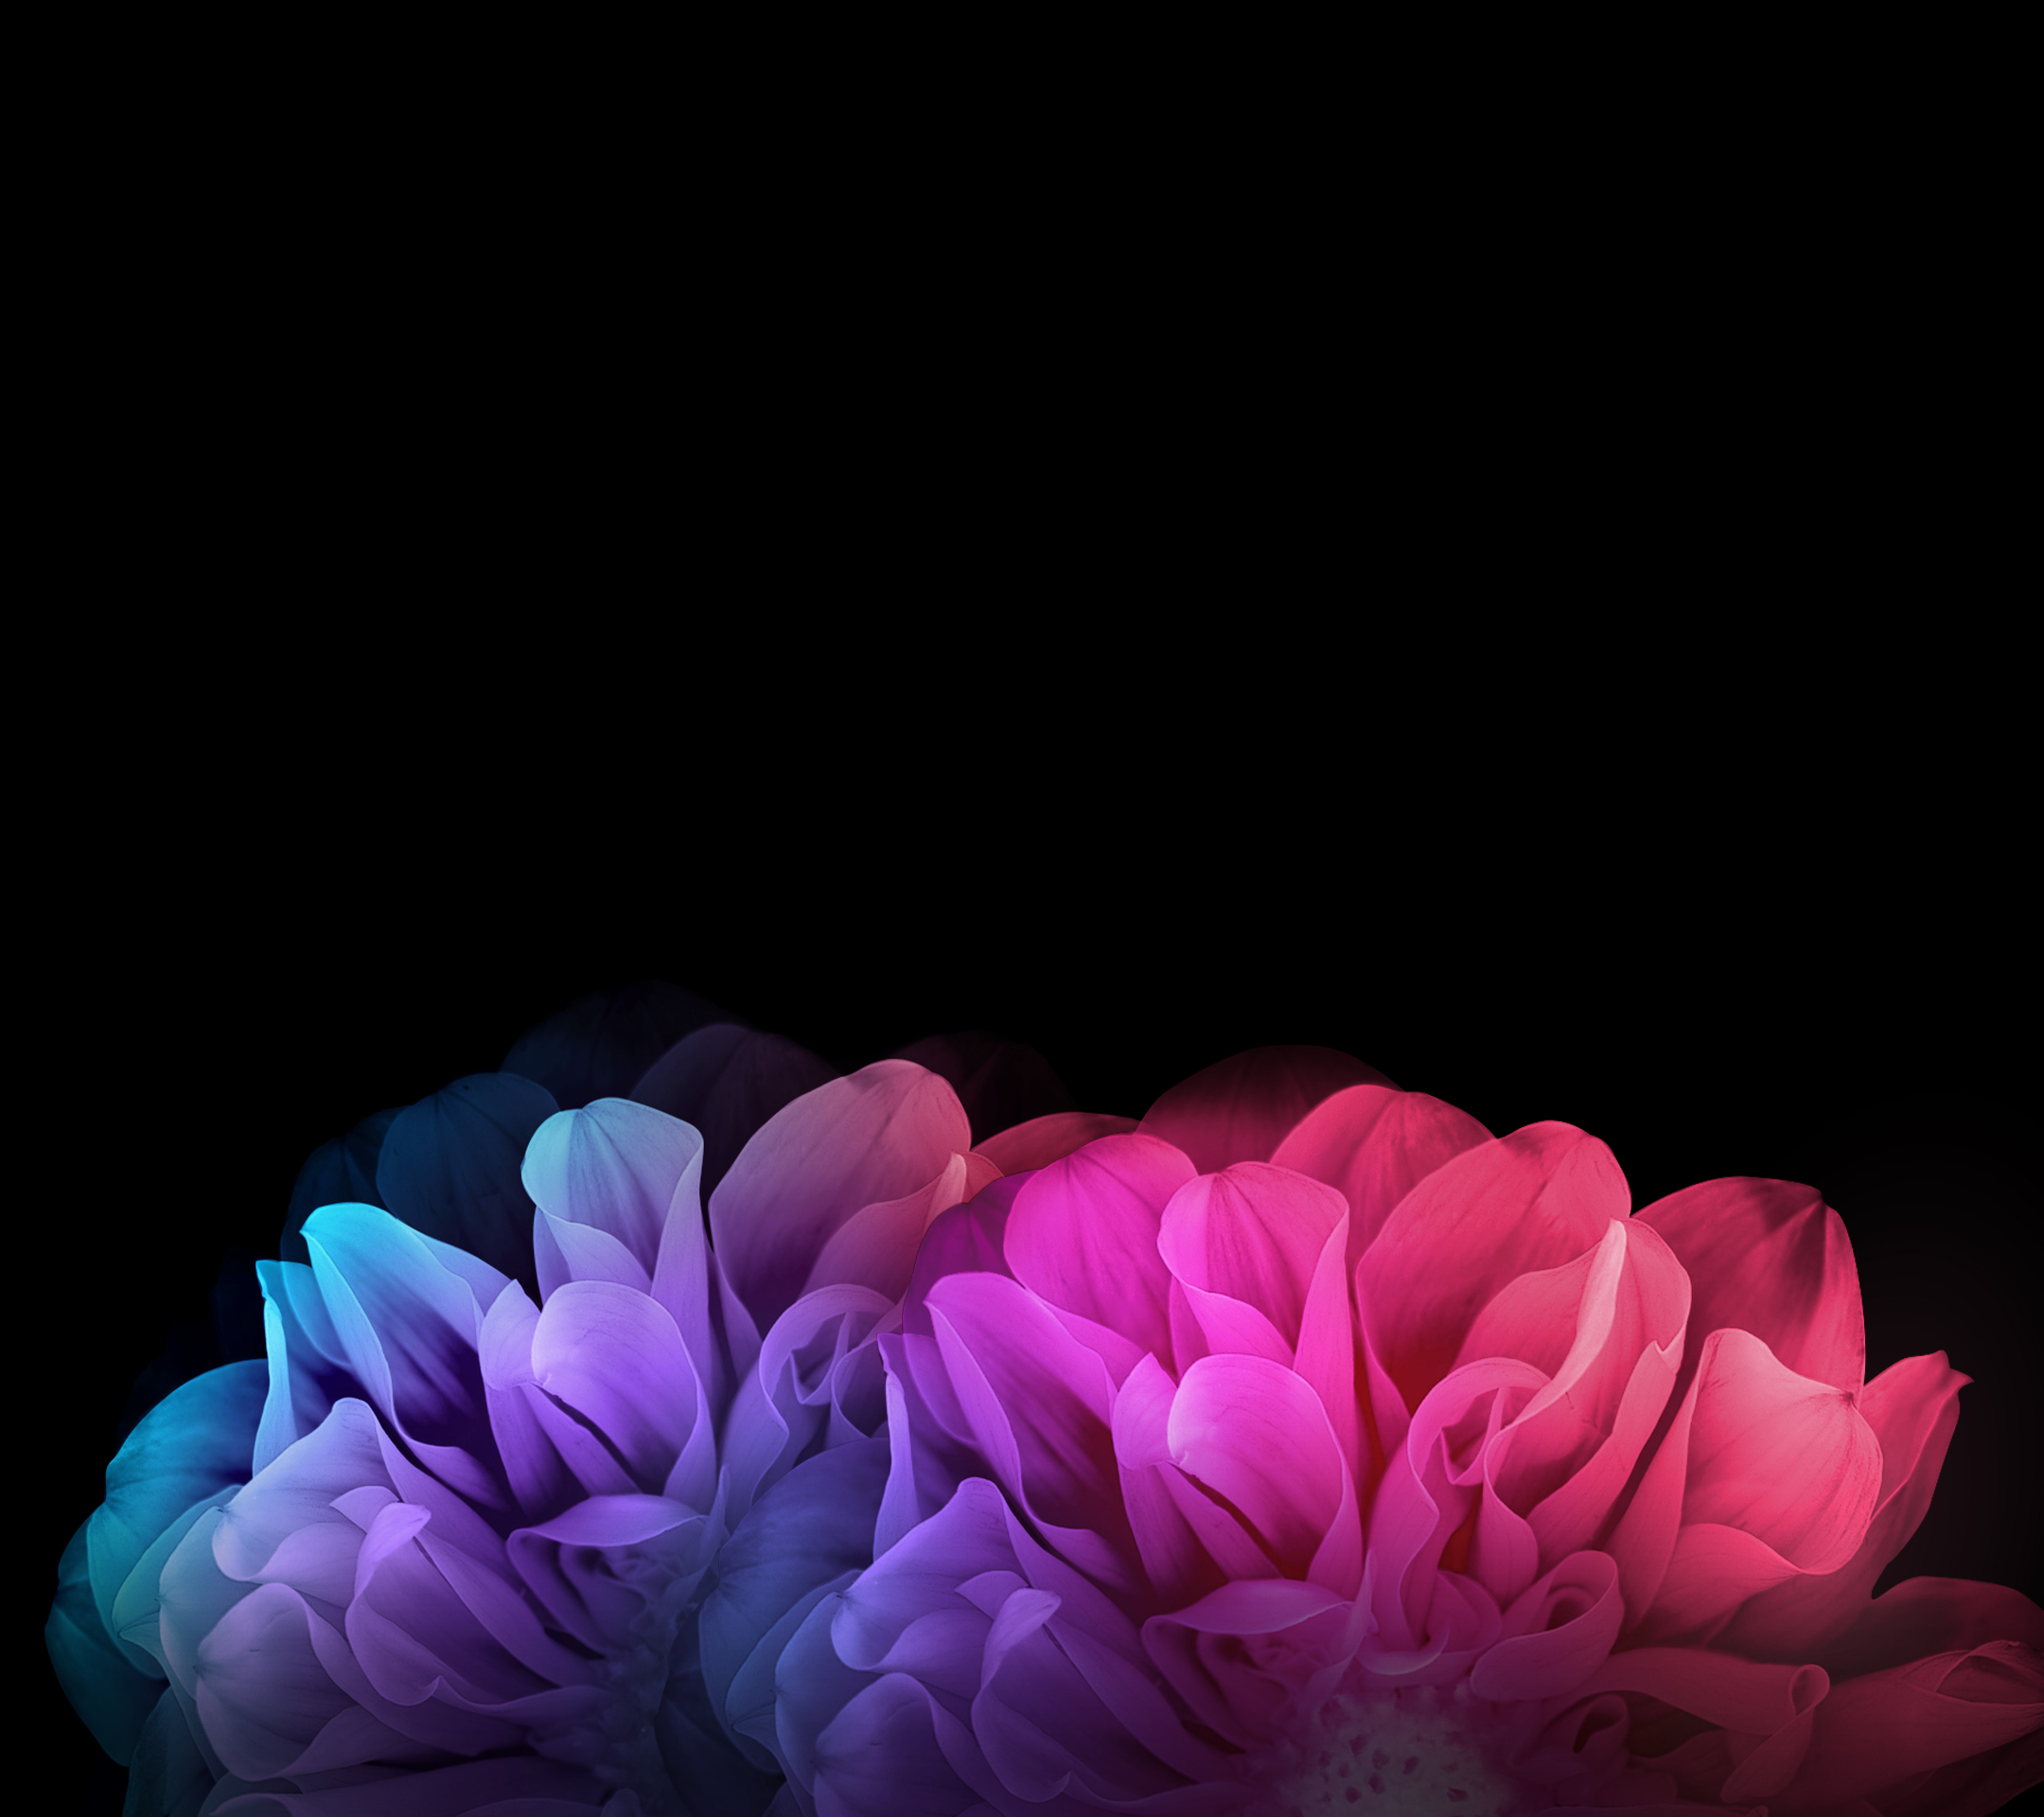 Download all LG G Flex 2 high-res wallpapers here